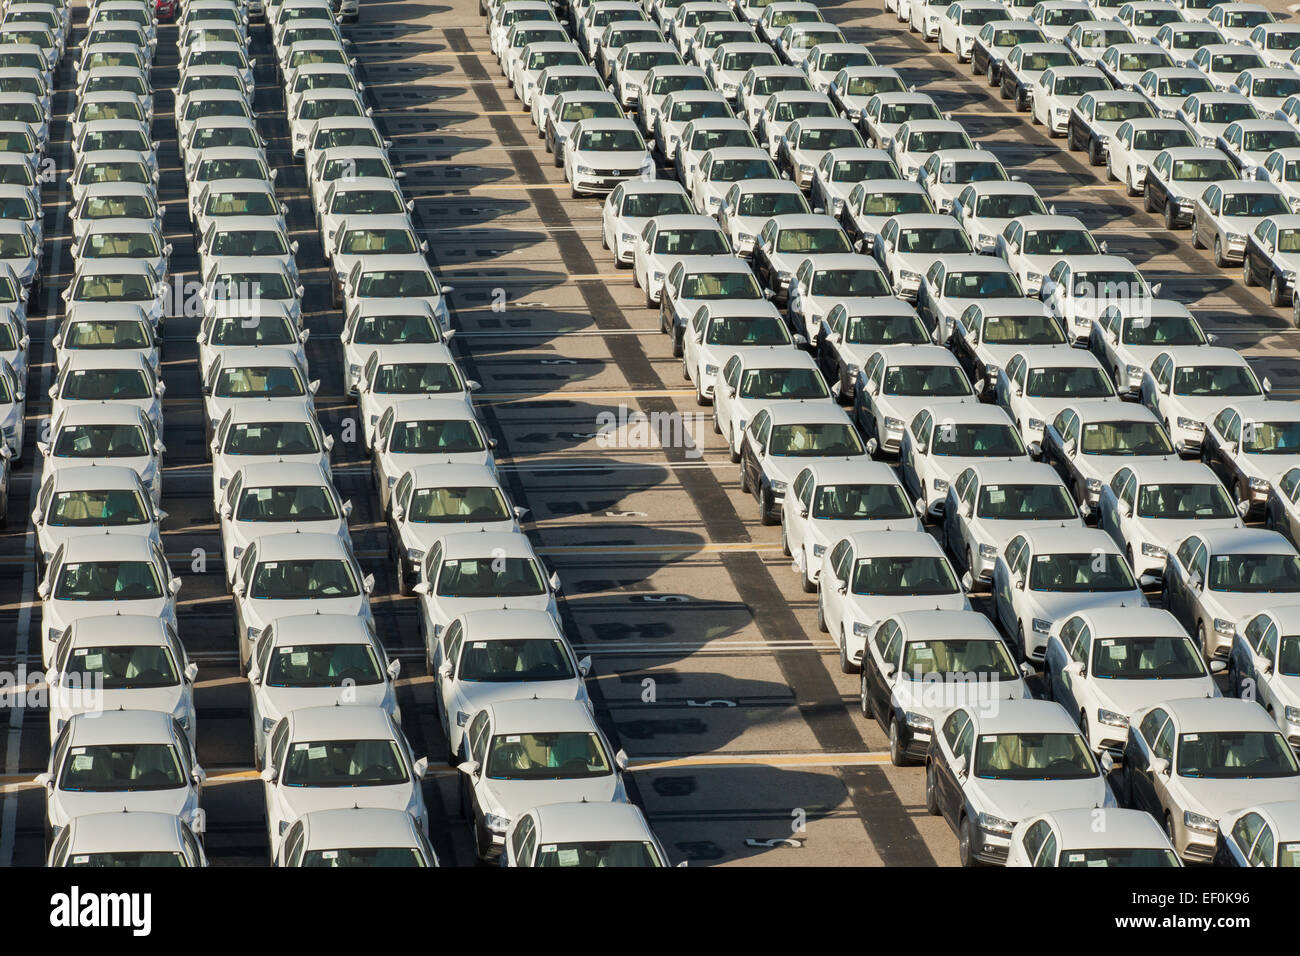 Rows of new cars parked in an international port Stock Photo